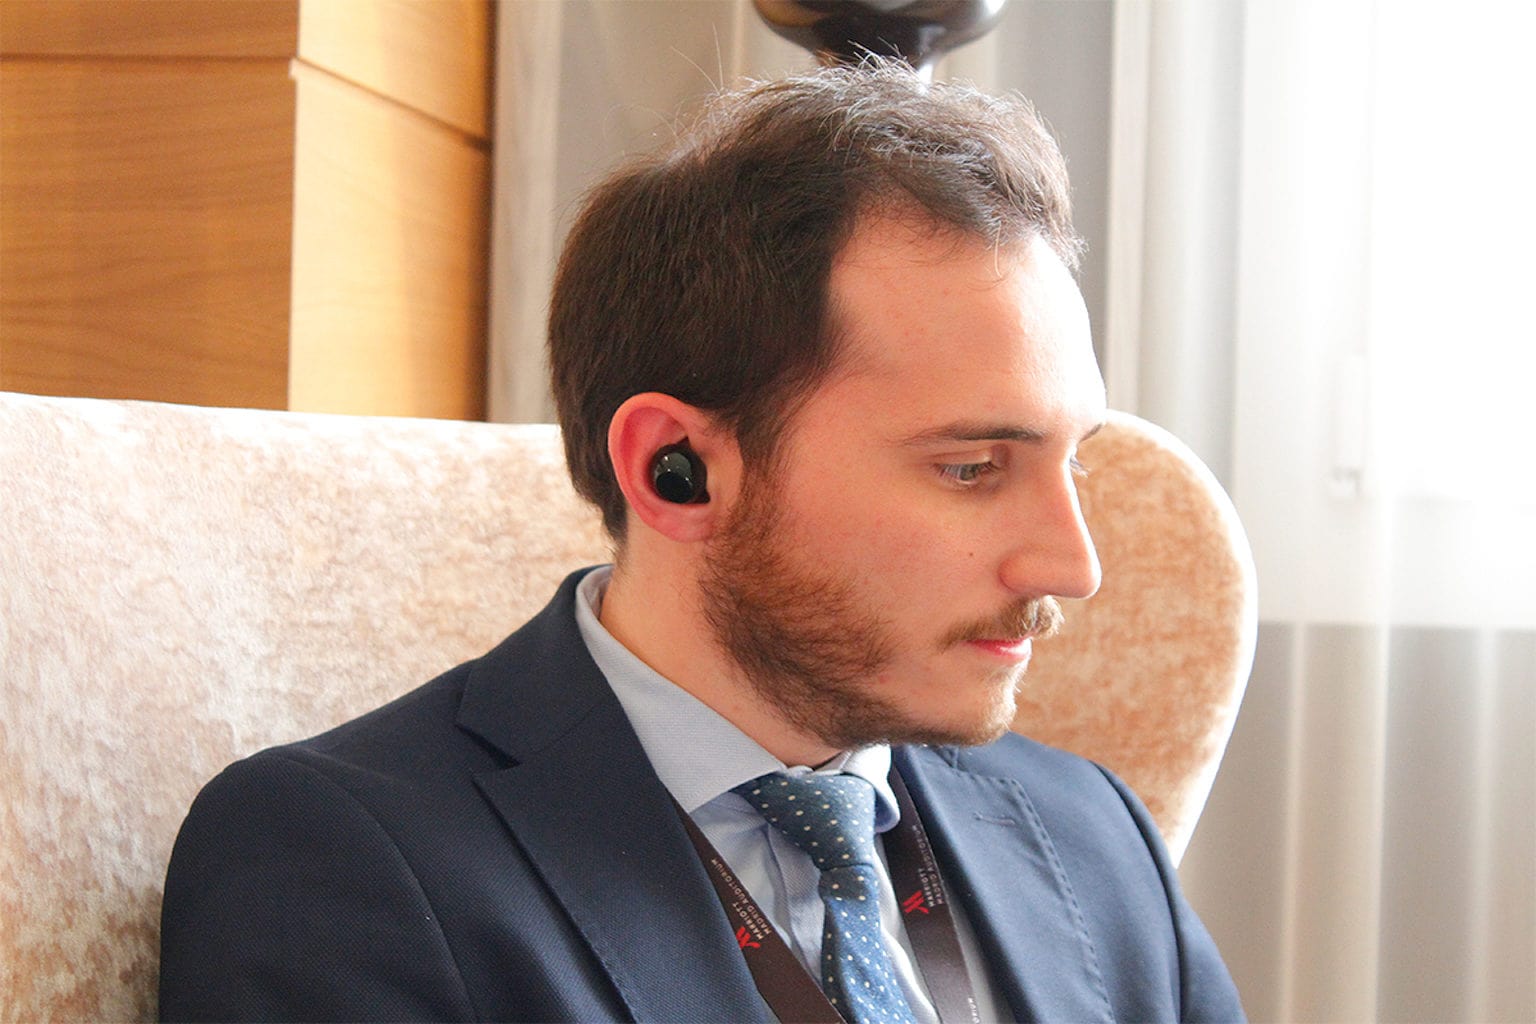 Speak to almost anyone with these translation earbuds that know 37+ languages.